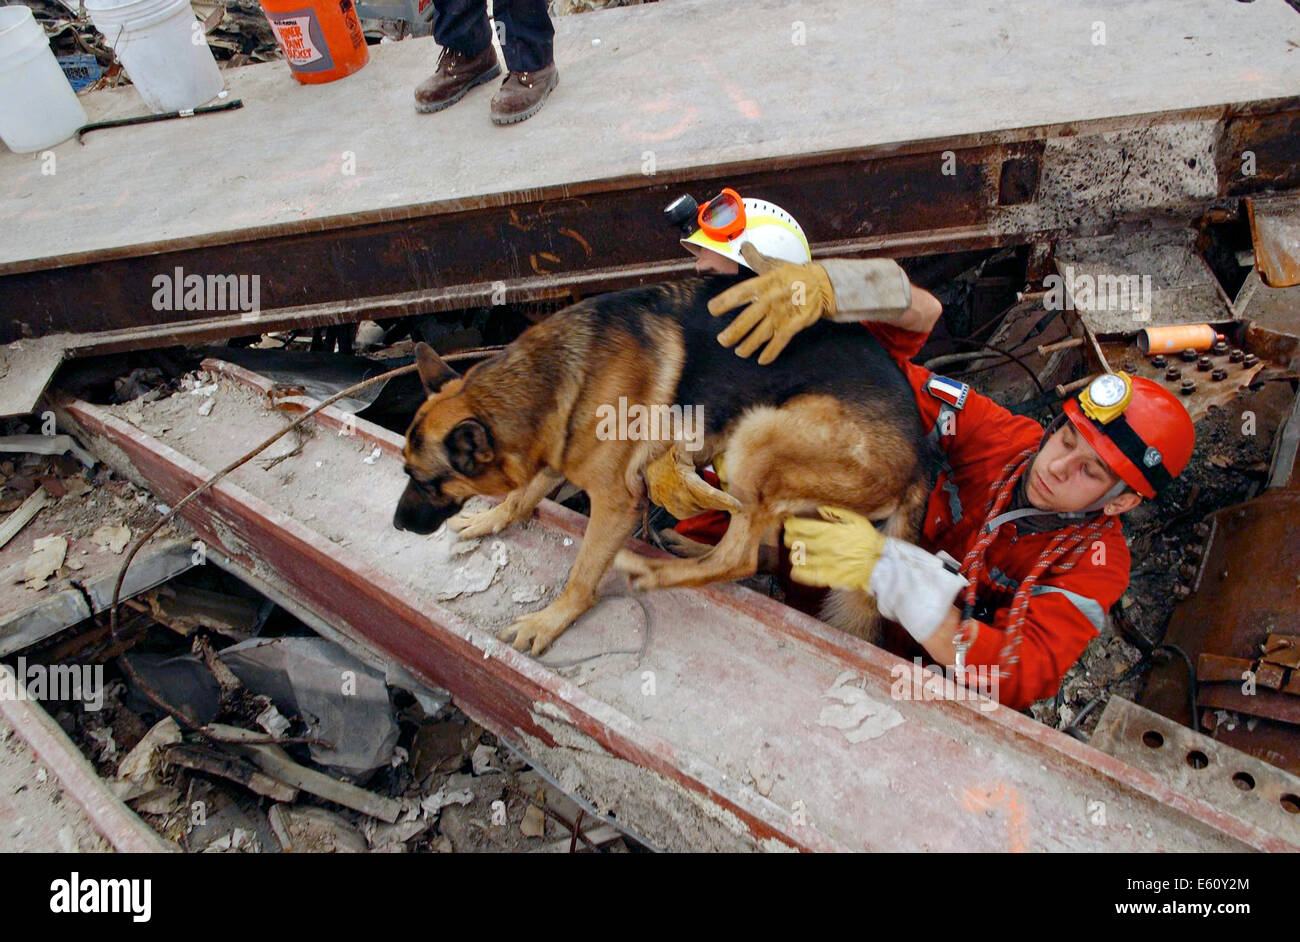 Rescue workers and sniffer dog emerge from the pile of rubble amongst the wreckage of the World Trade Center in the aftermath of a massive terrorist attack which destroyed the twin towers killing 2,606 people September 20, 2001 in New York, NY. Stock Photo